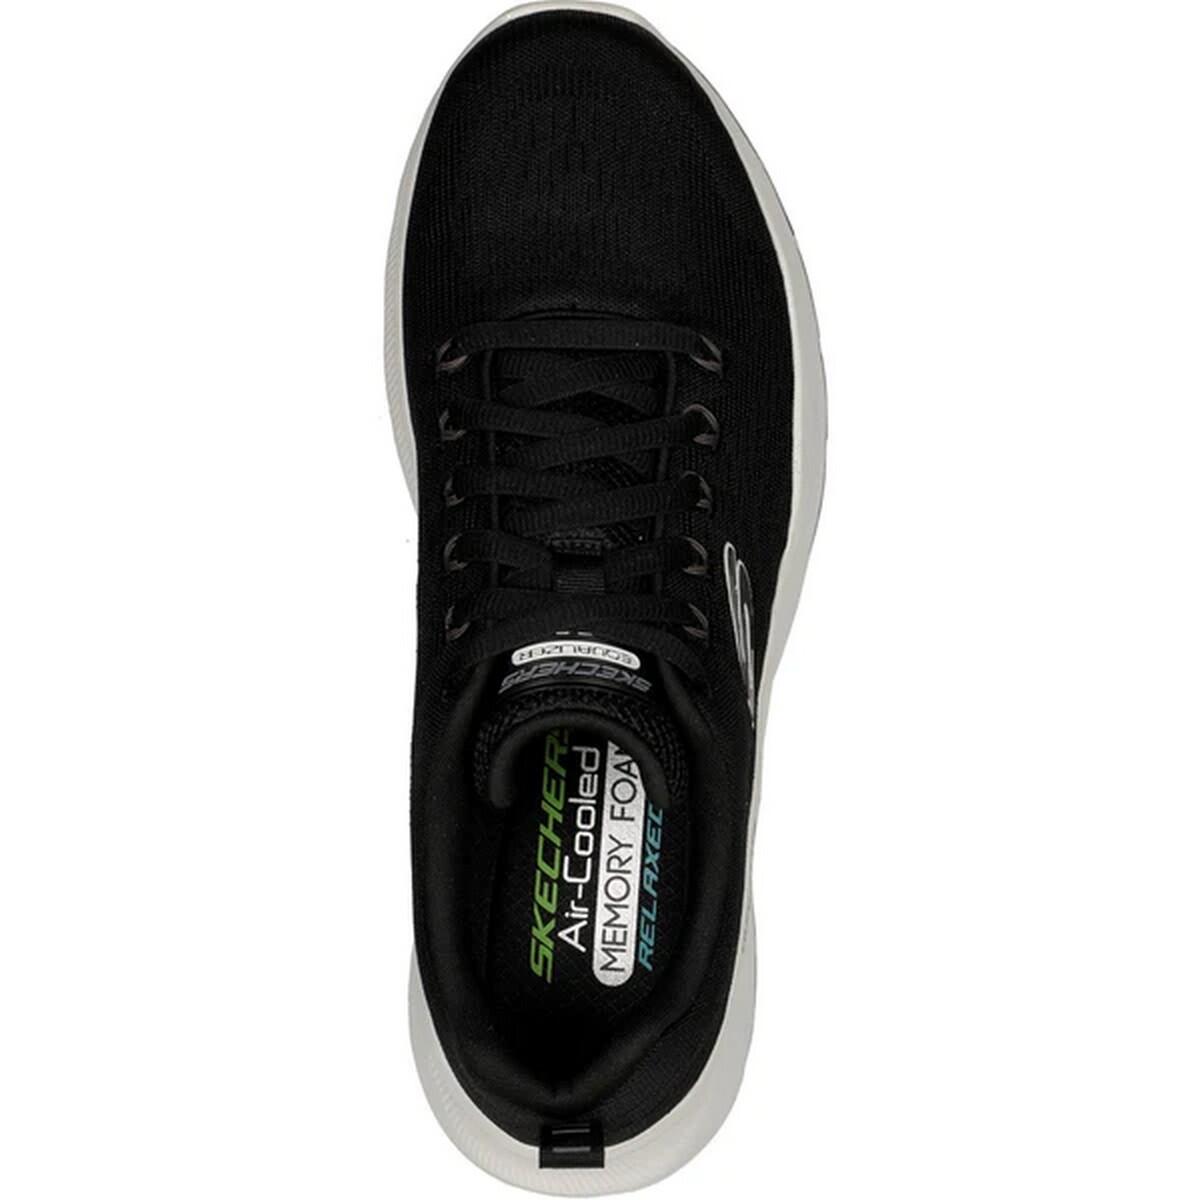 Mens Equalizer 5.0 Trainers (Black/White) 4/5